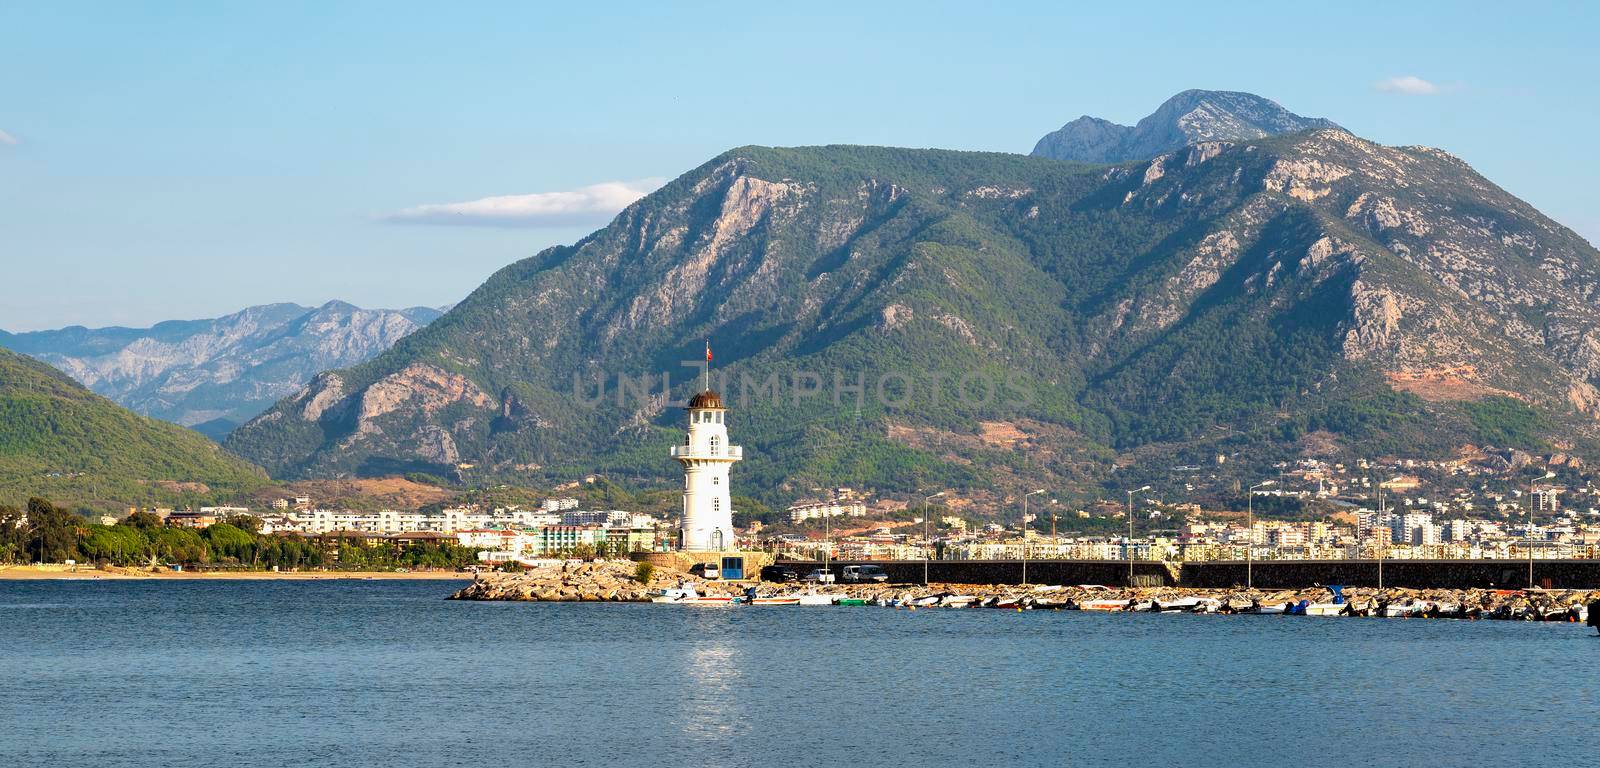 Turkey, Alanya - November 9, 2020: The old lighthouse in the port of Alanya against the backdrop of beautiful mountains. View from the sea.